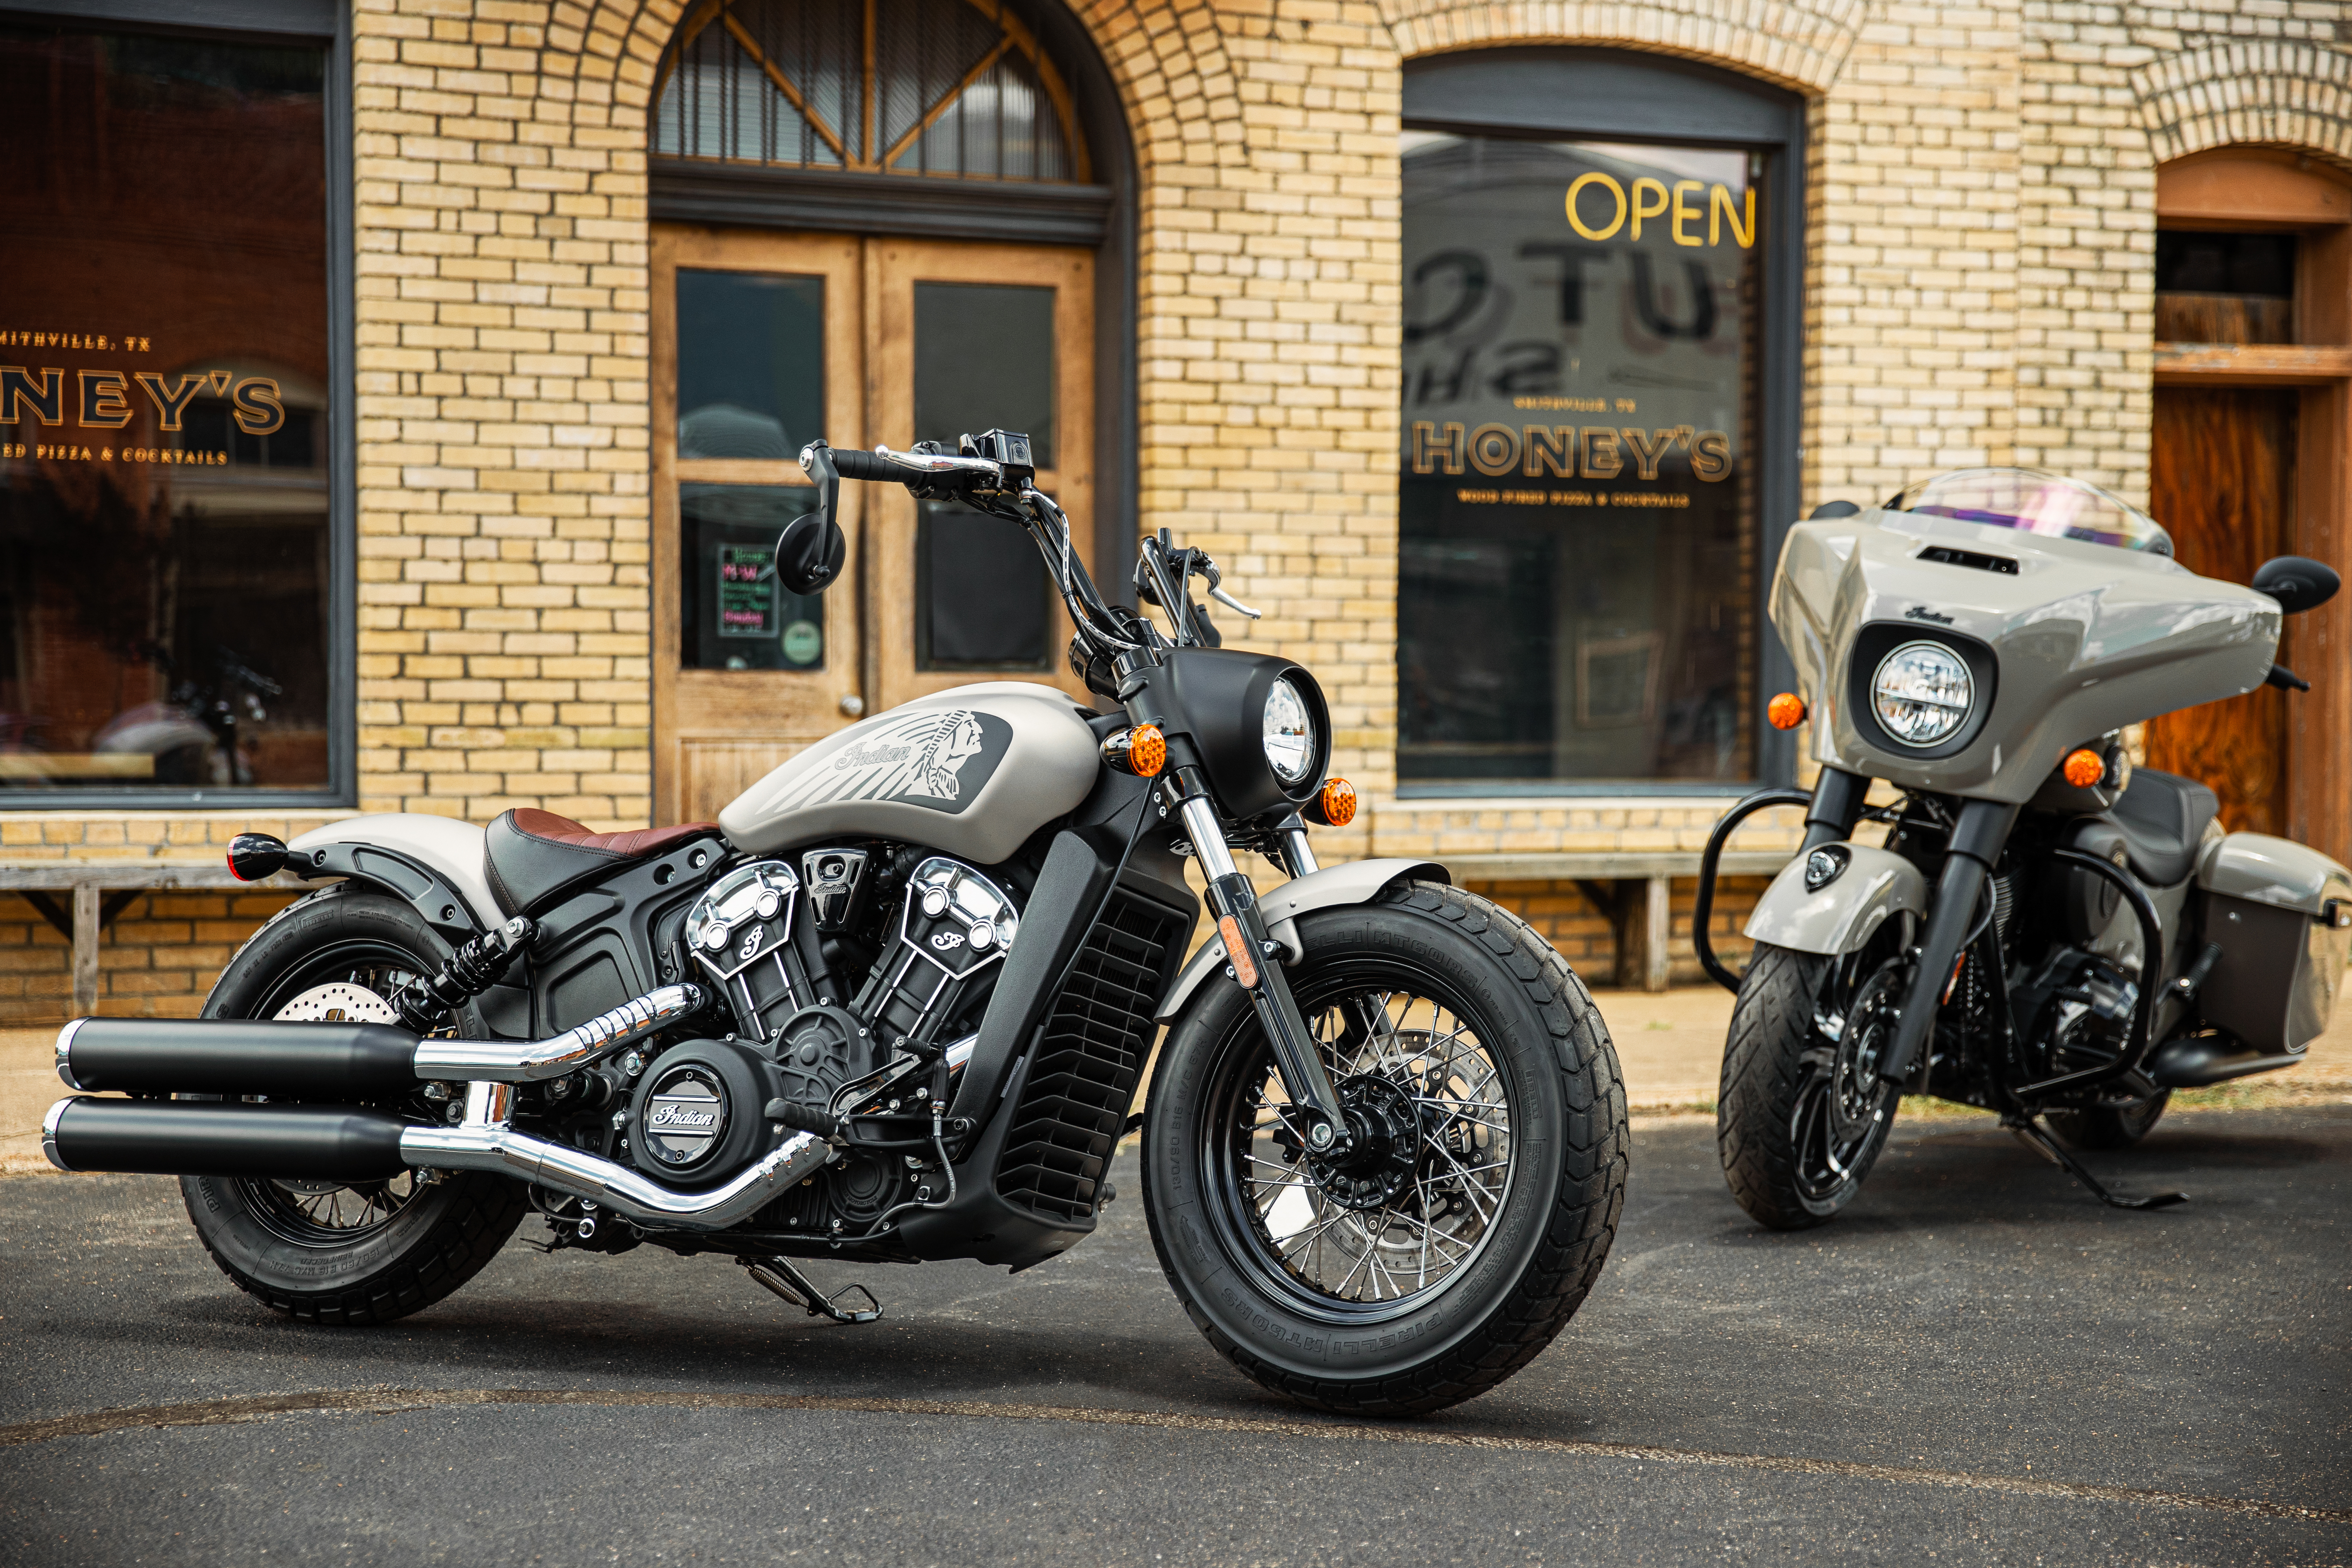 Motorcycle Introduces 2022 Lineup Updated & All-New Cruiser, Bagger, Accessories | Business Wire